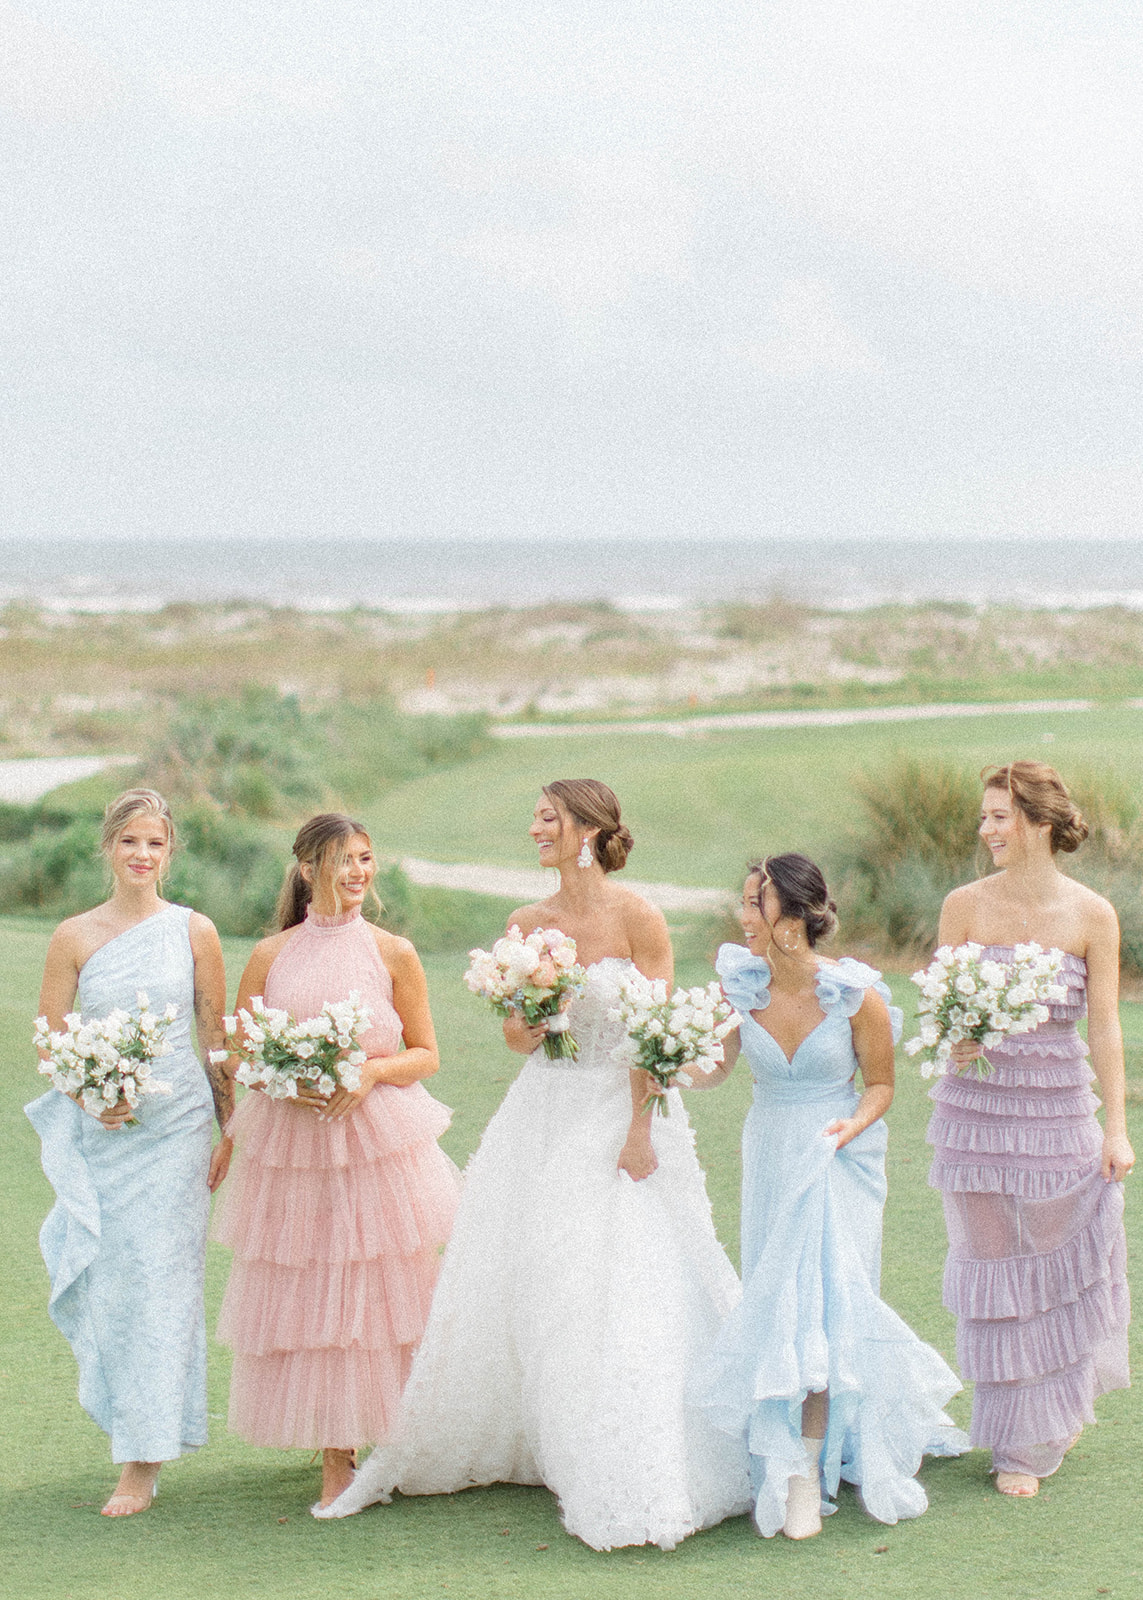 Mix and match pastel colored bridesmaids dresses at Southern wedding in the lowcountry